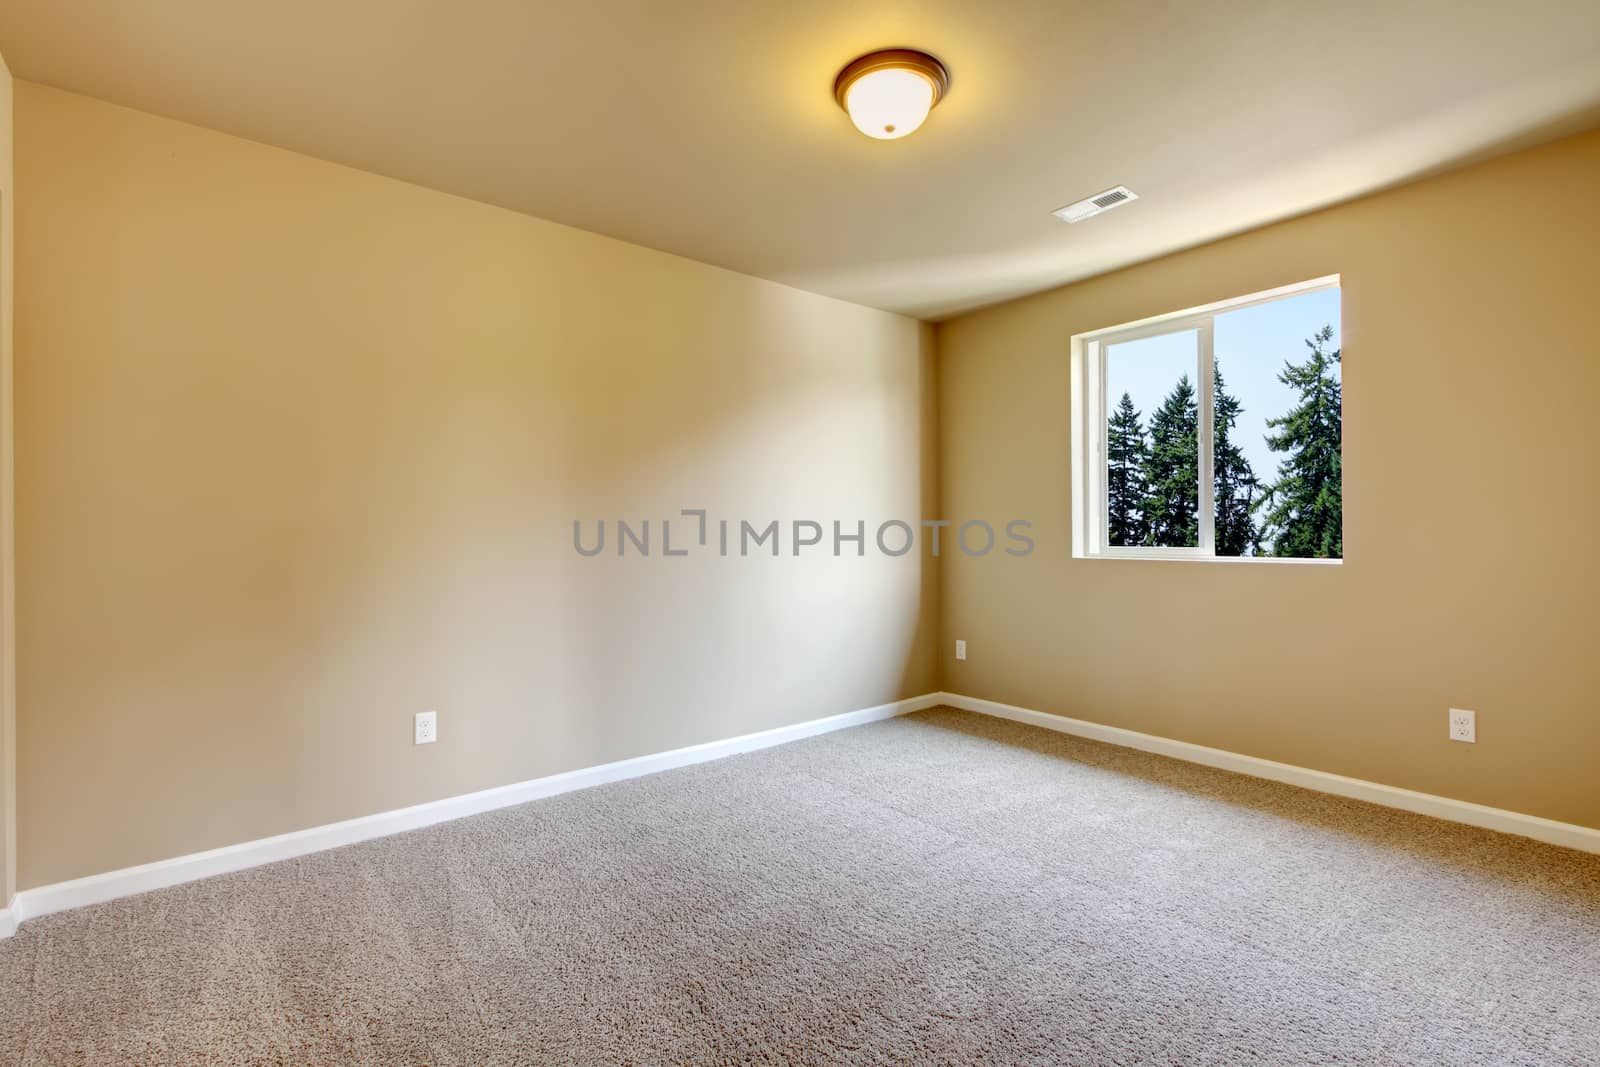 New empty room with beige carpet.. New house development in USA.